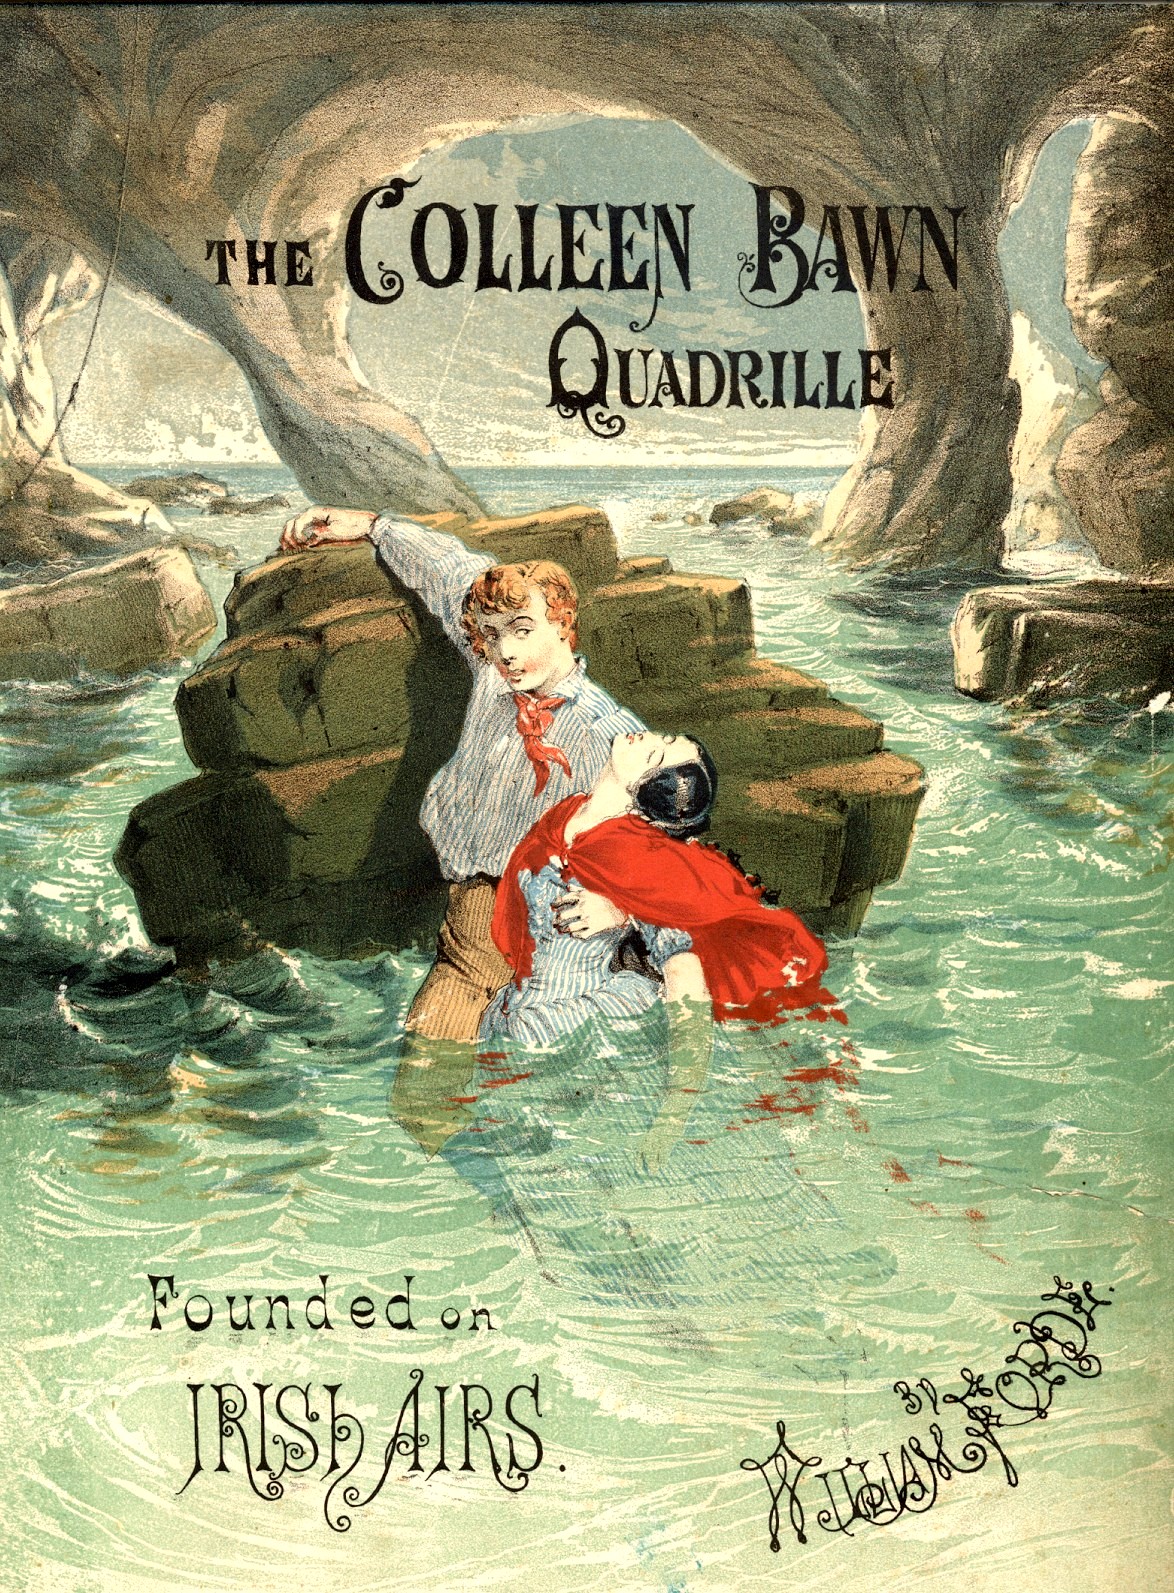 Cover for sheet music accompanying the play "The Colleen Bawn" by Dion Boucicault, c.1861, featuring the famous drowning scene